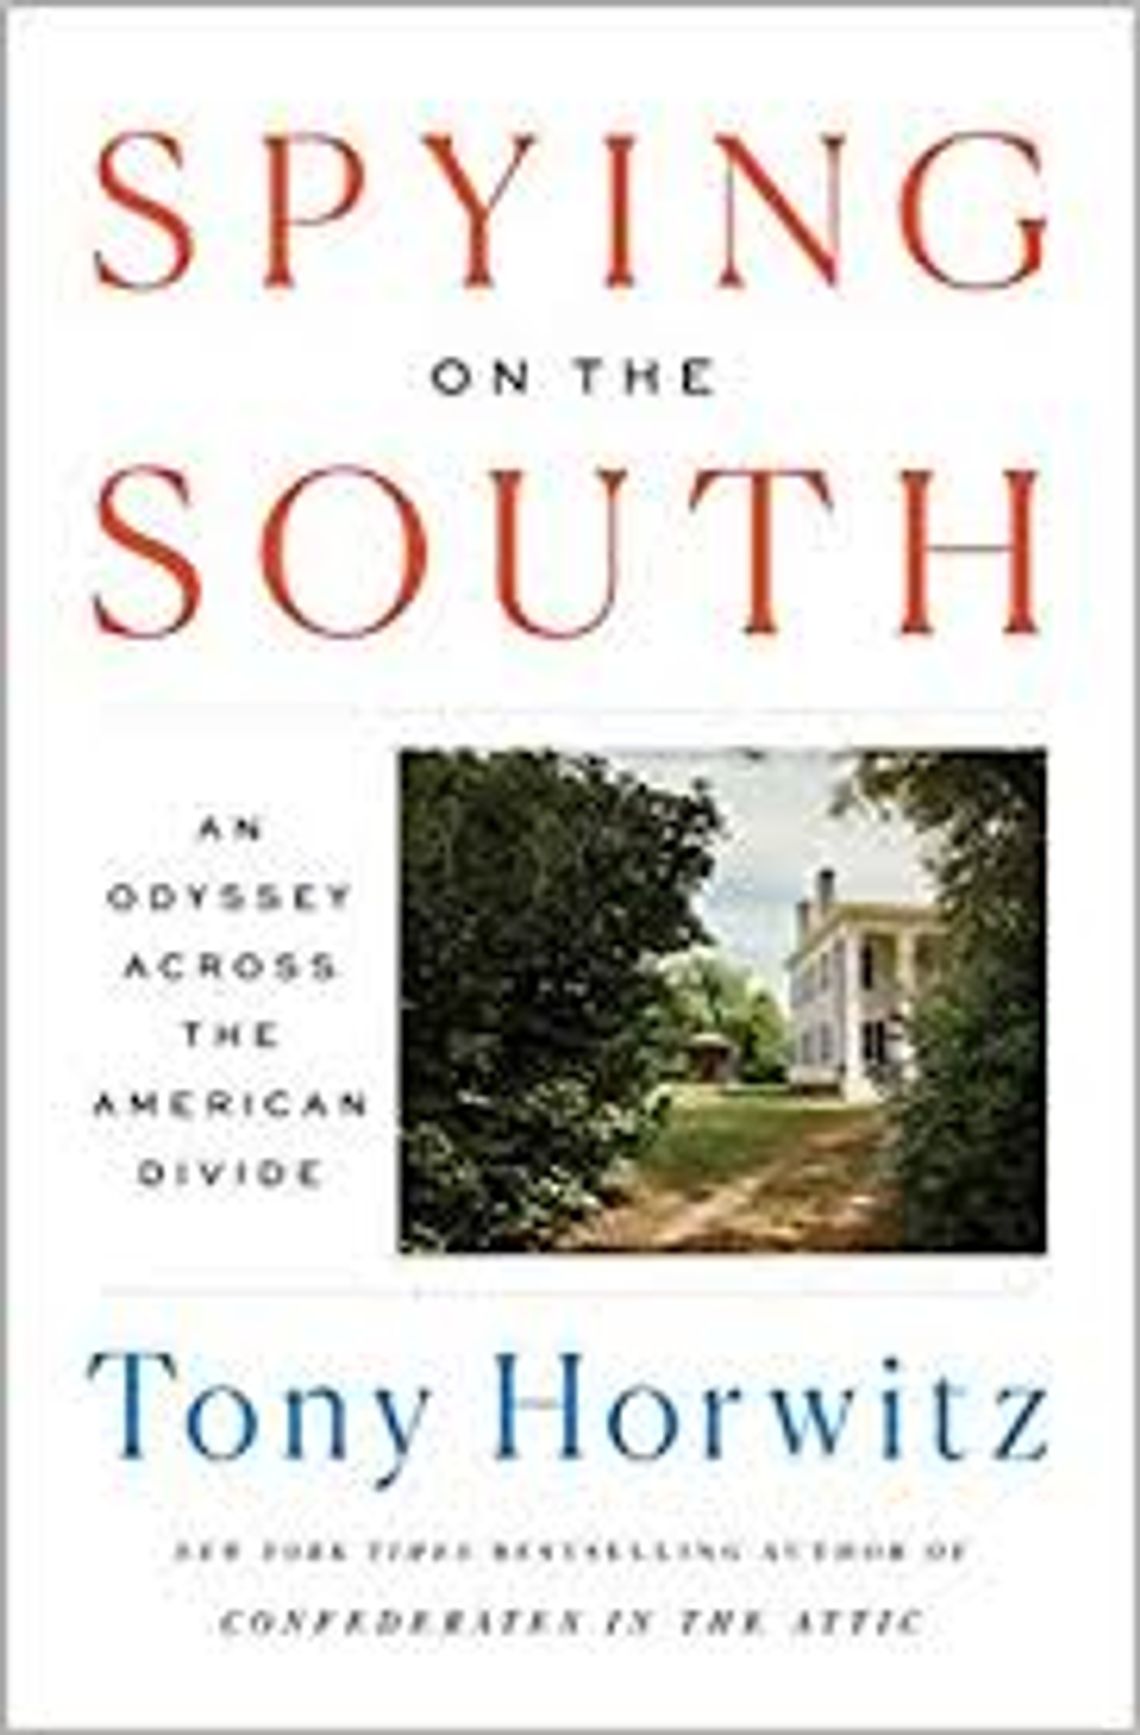 Book Review -- Spying on the South